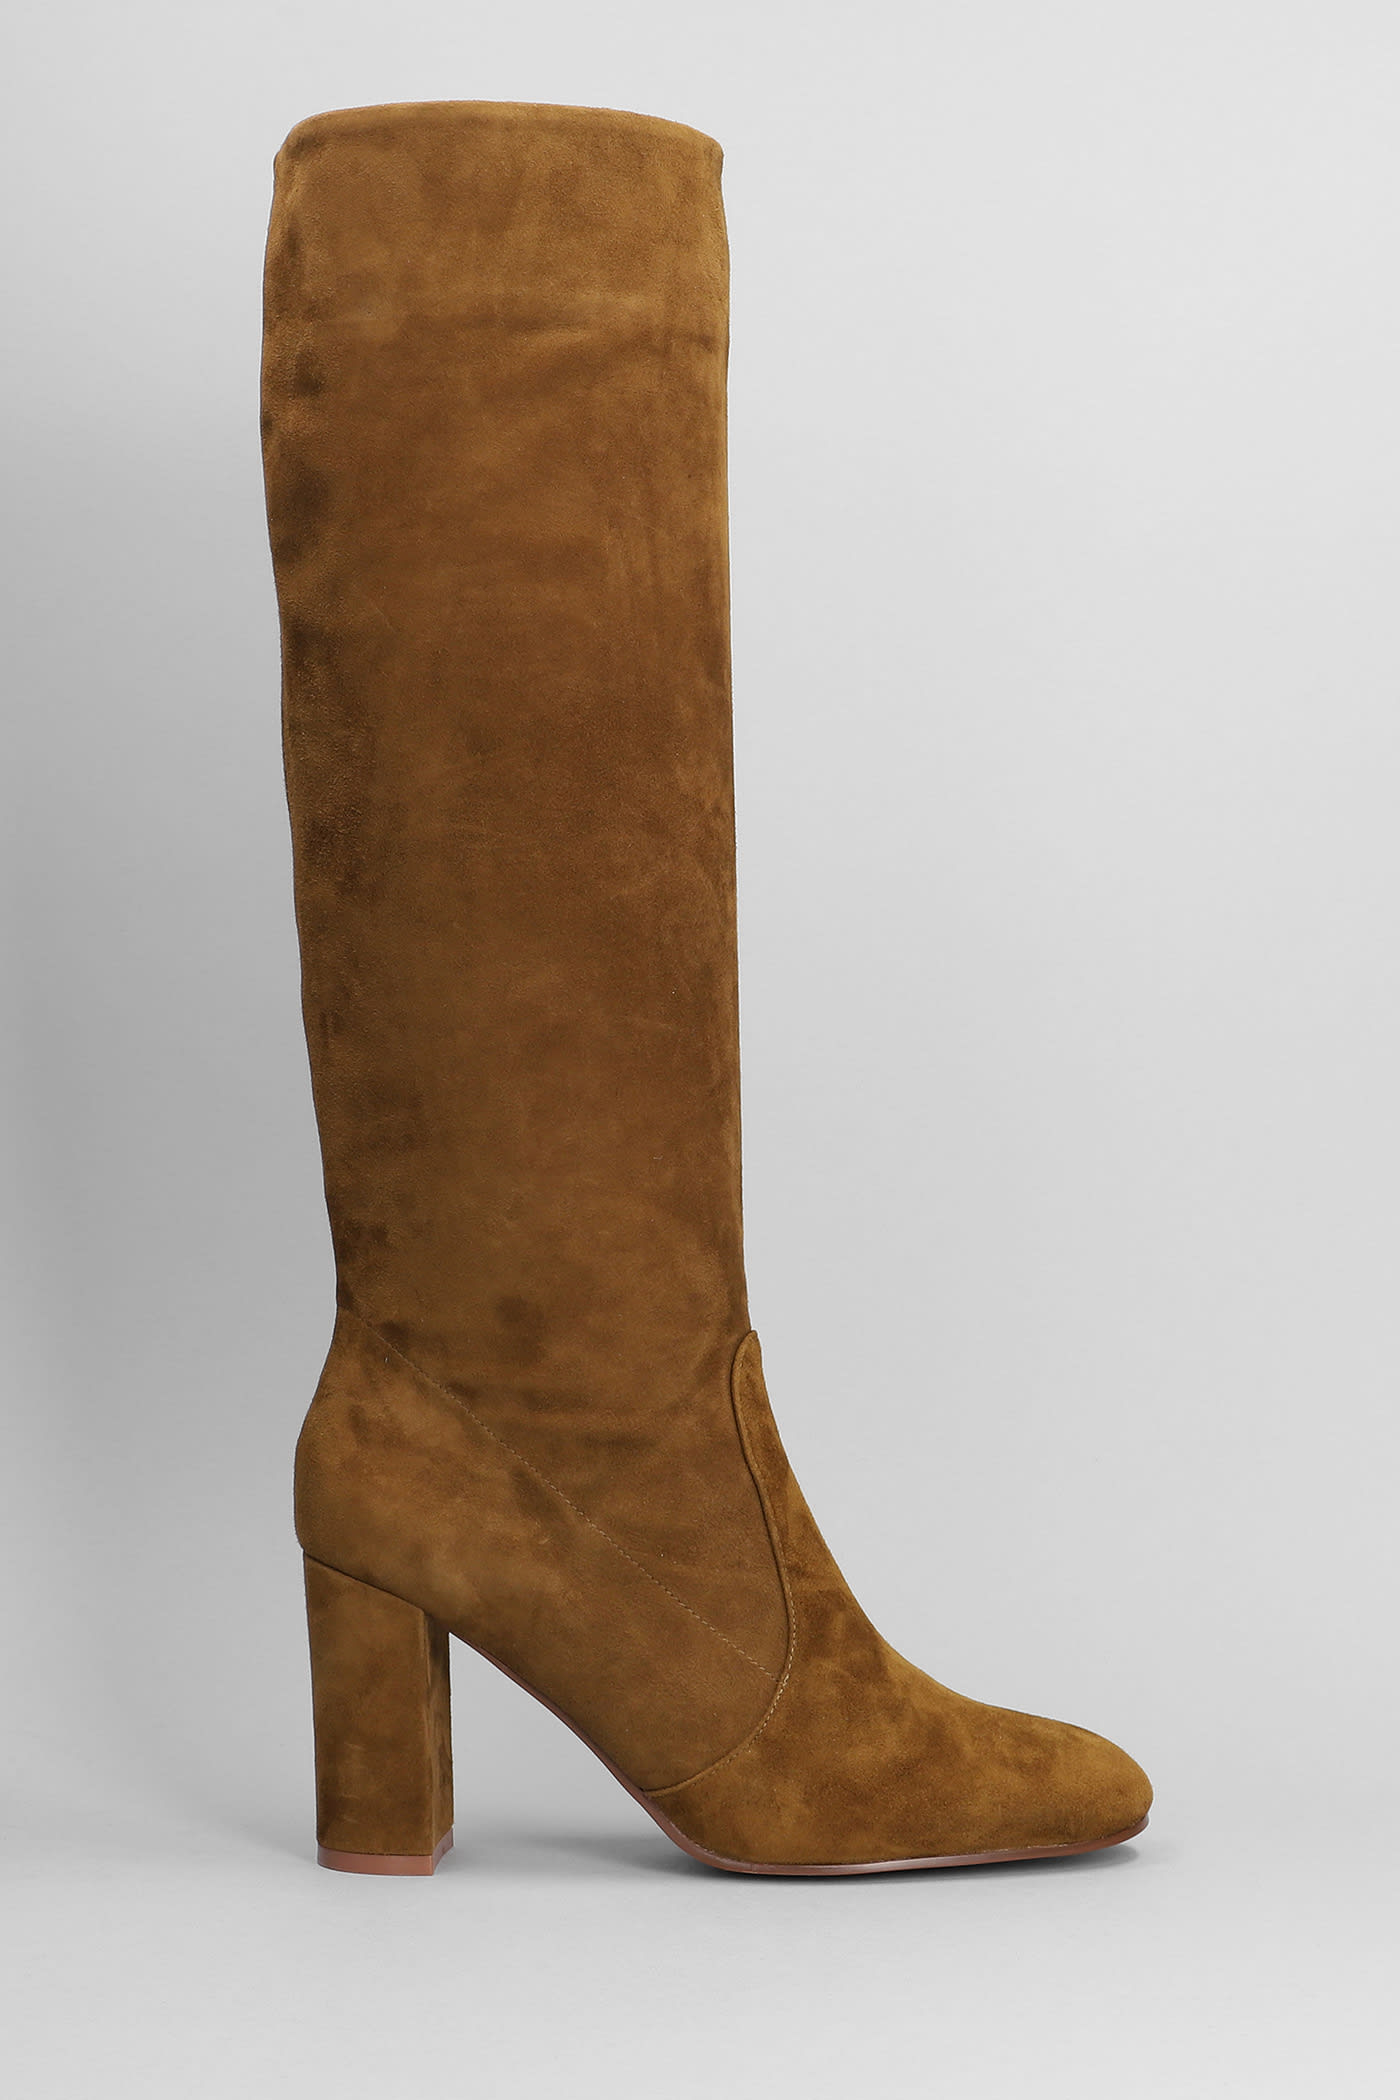 Lola Cruz High Heels Boots In Leather Color Suede